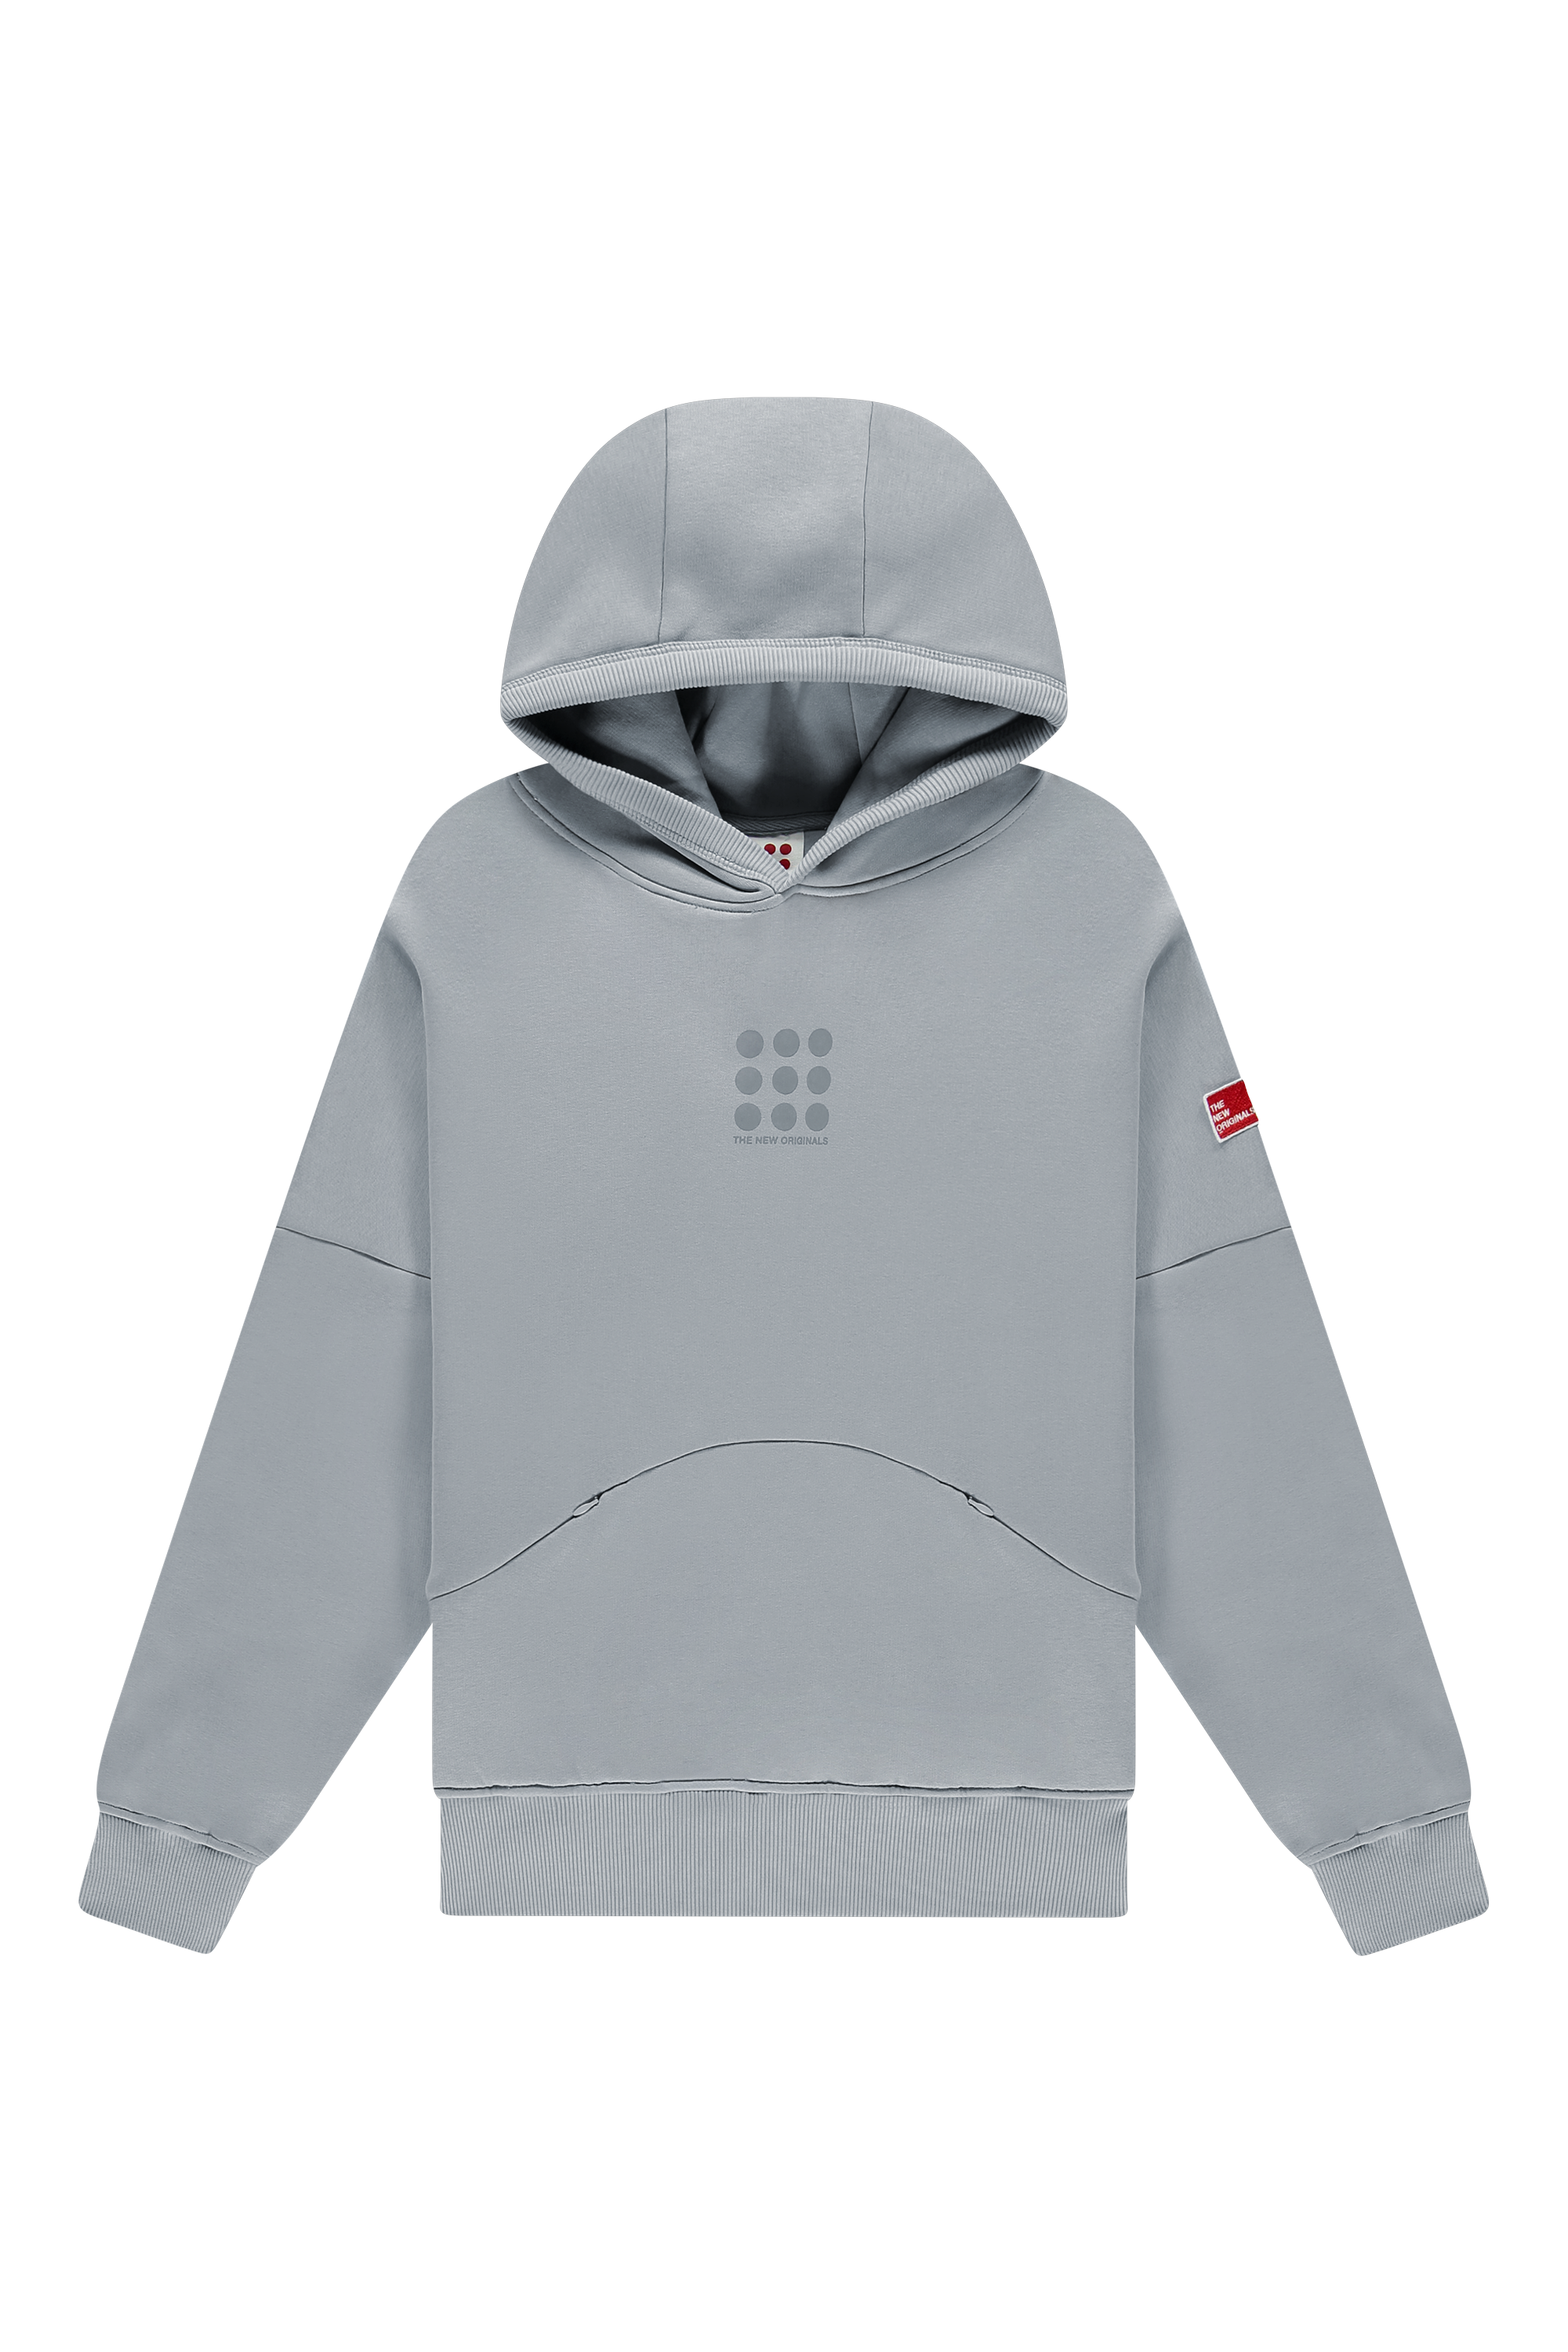 files-hoodie_greyblue_front-png